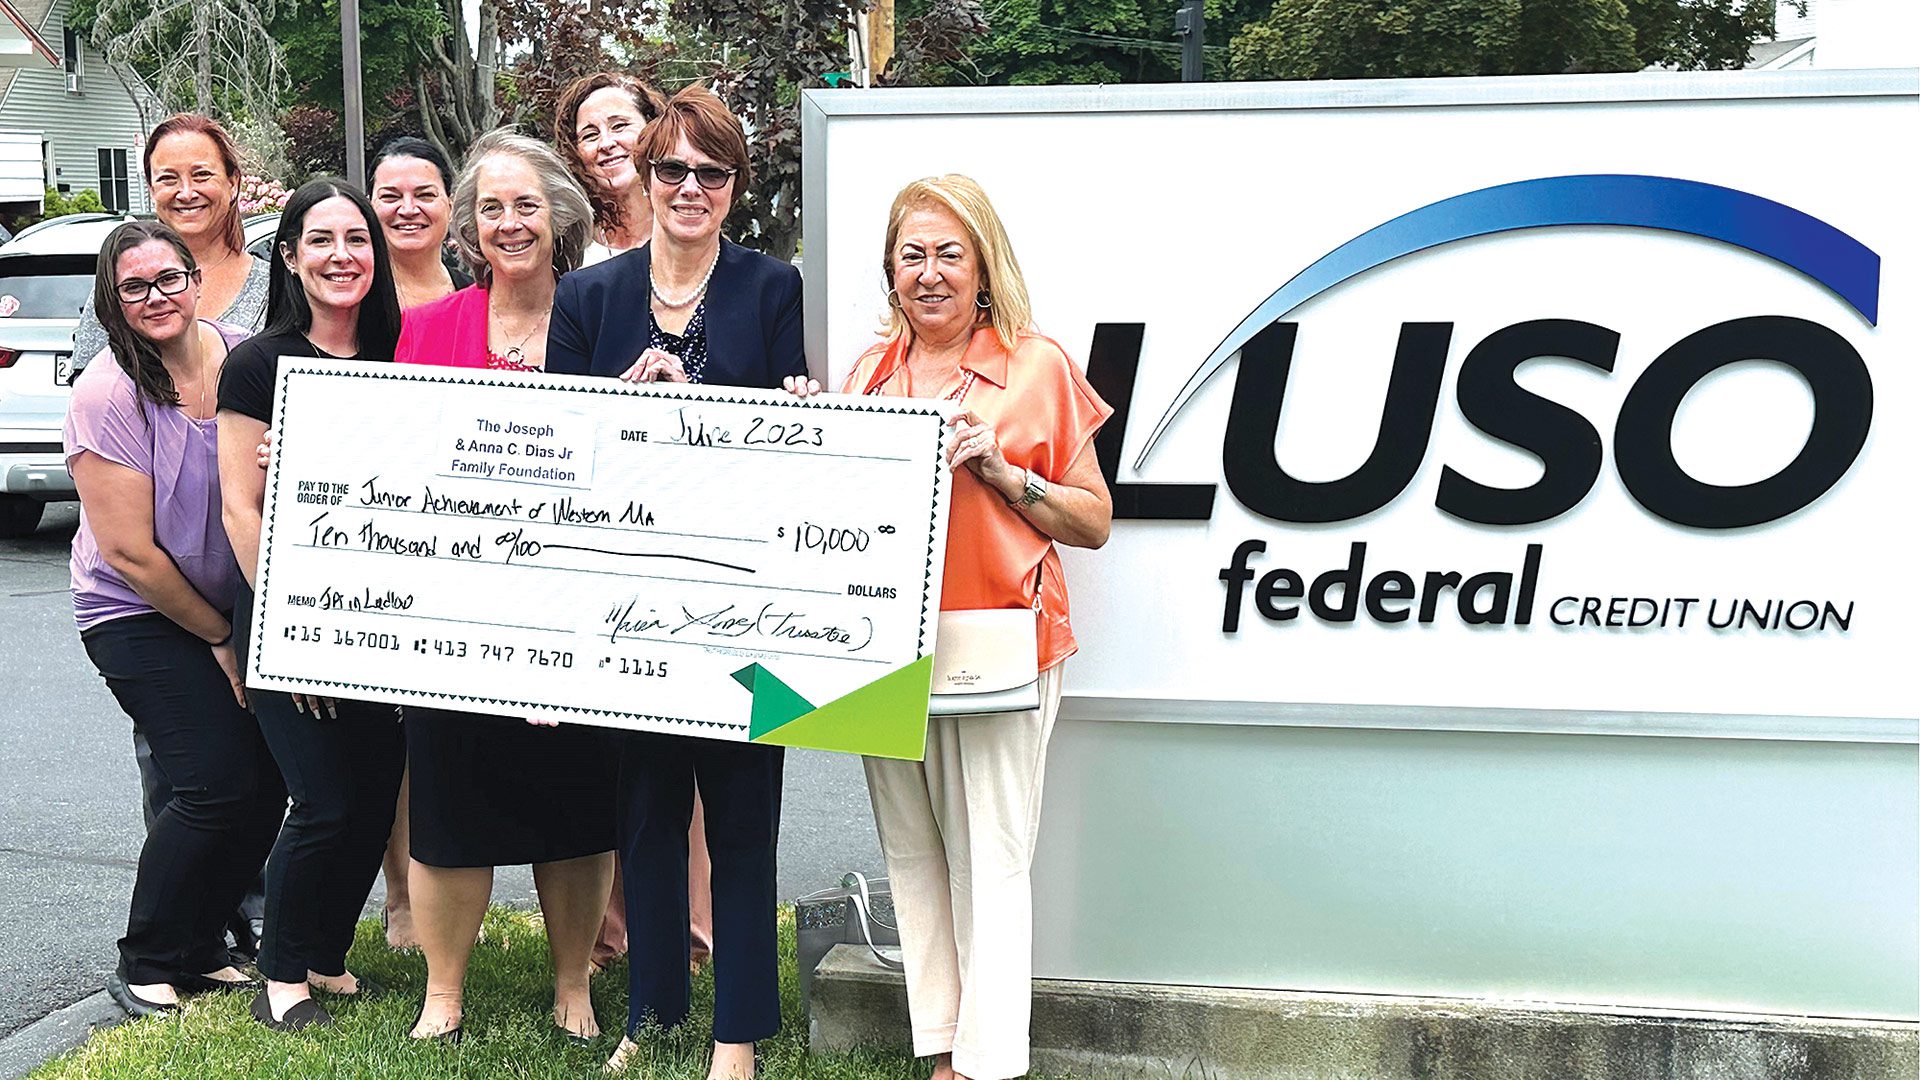 Pictured: Joseph & Anna C. Dias Jr. Family Foundation trustee Maria Gomes (far right) presents the $10,000 check to JAWM President Jennifer Connolly (second from right) alongside a group of LUSO employees.